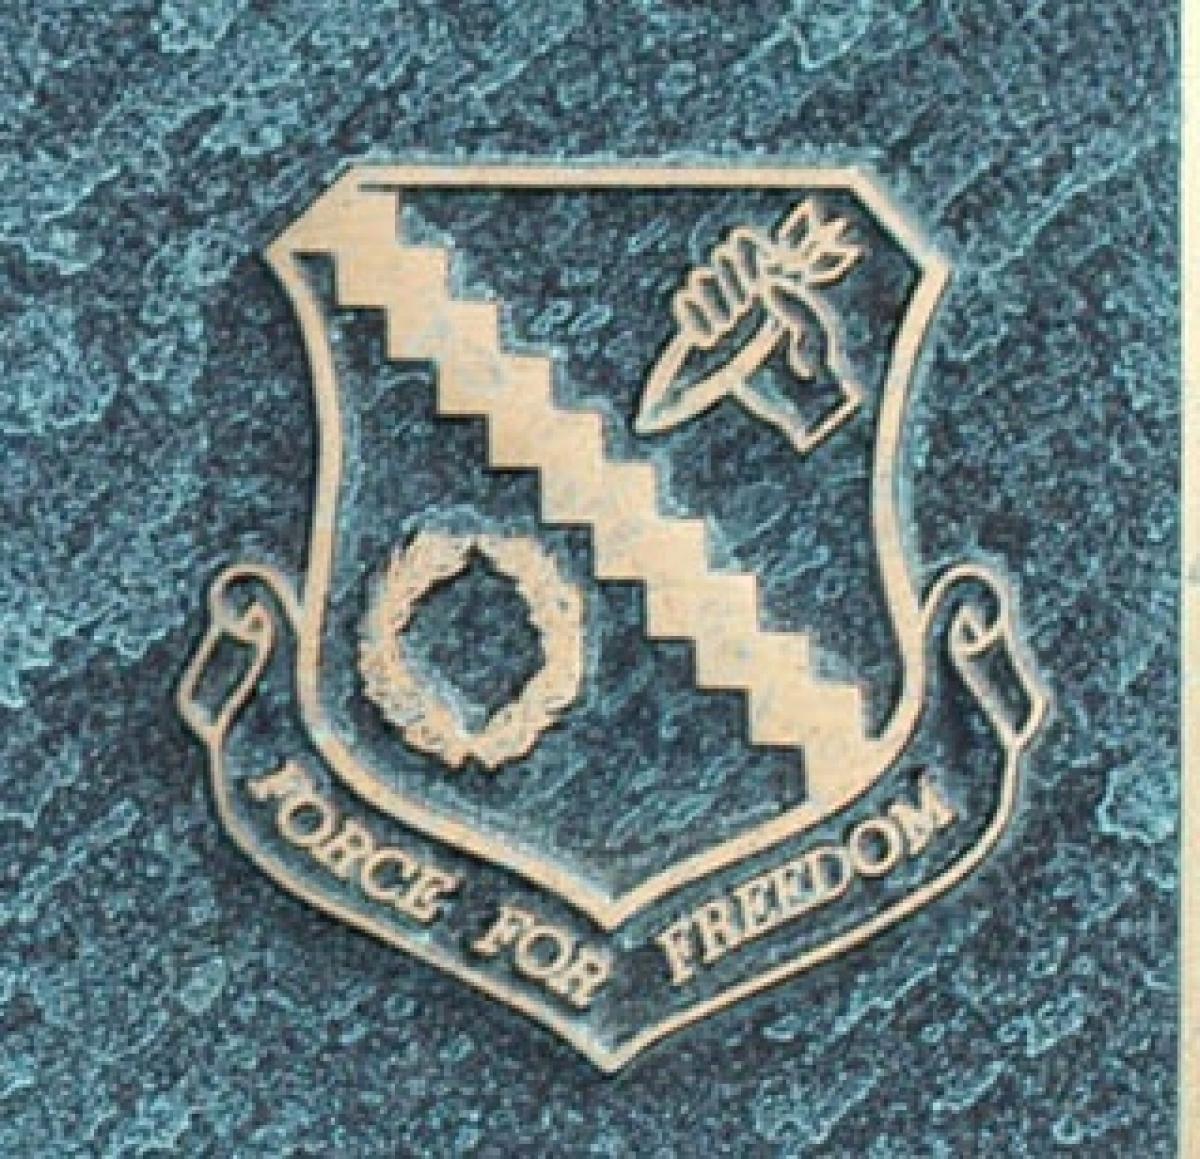 OK, Grove, Headstone Symbols and Meanings, U. S. Air Force 98th Bomb Group